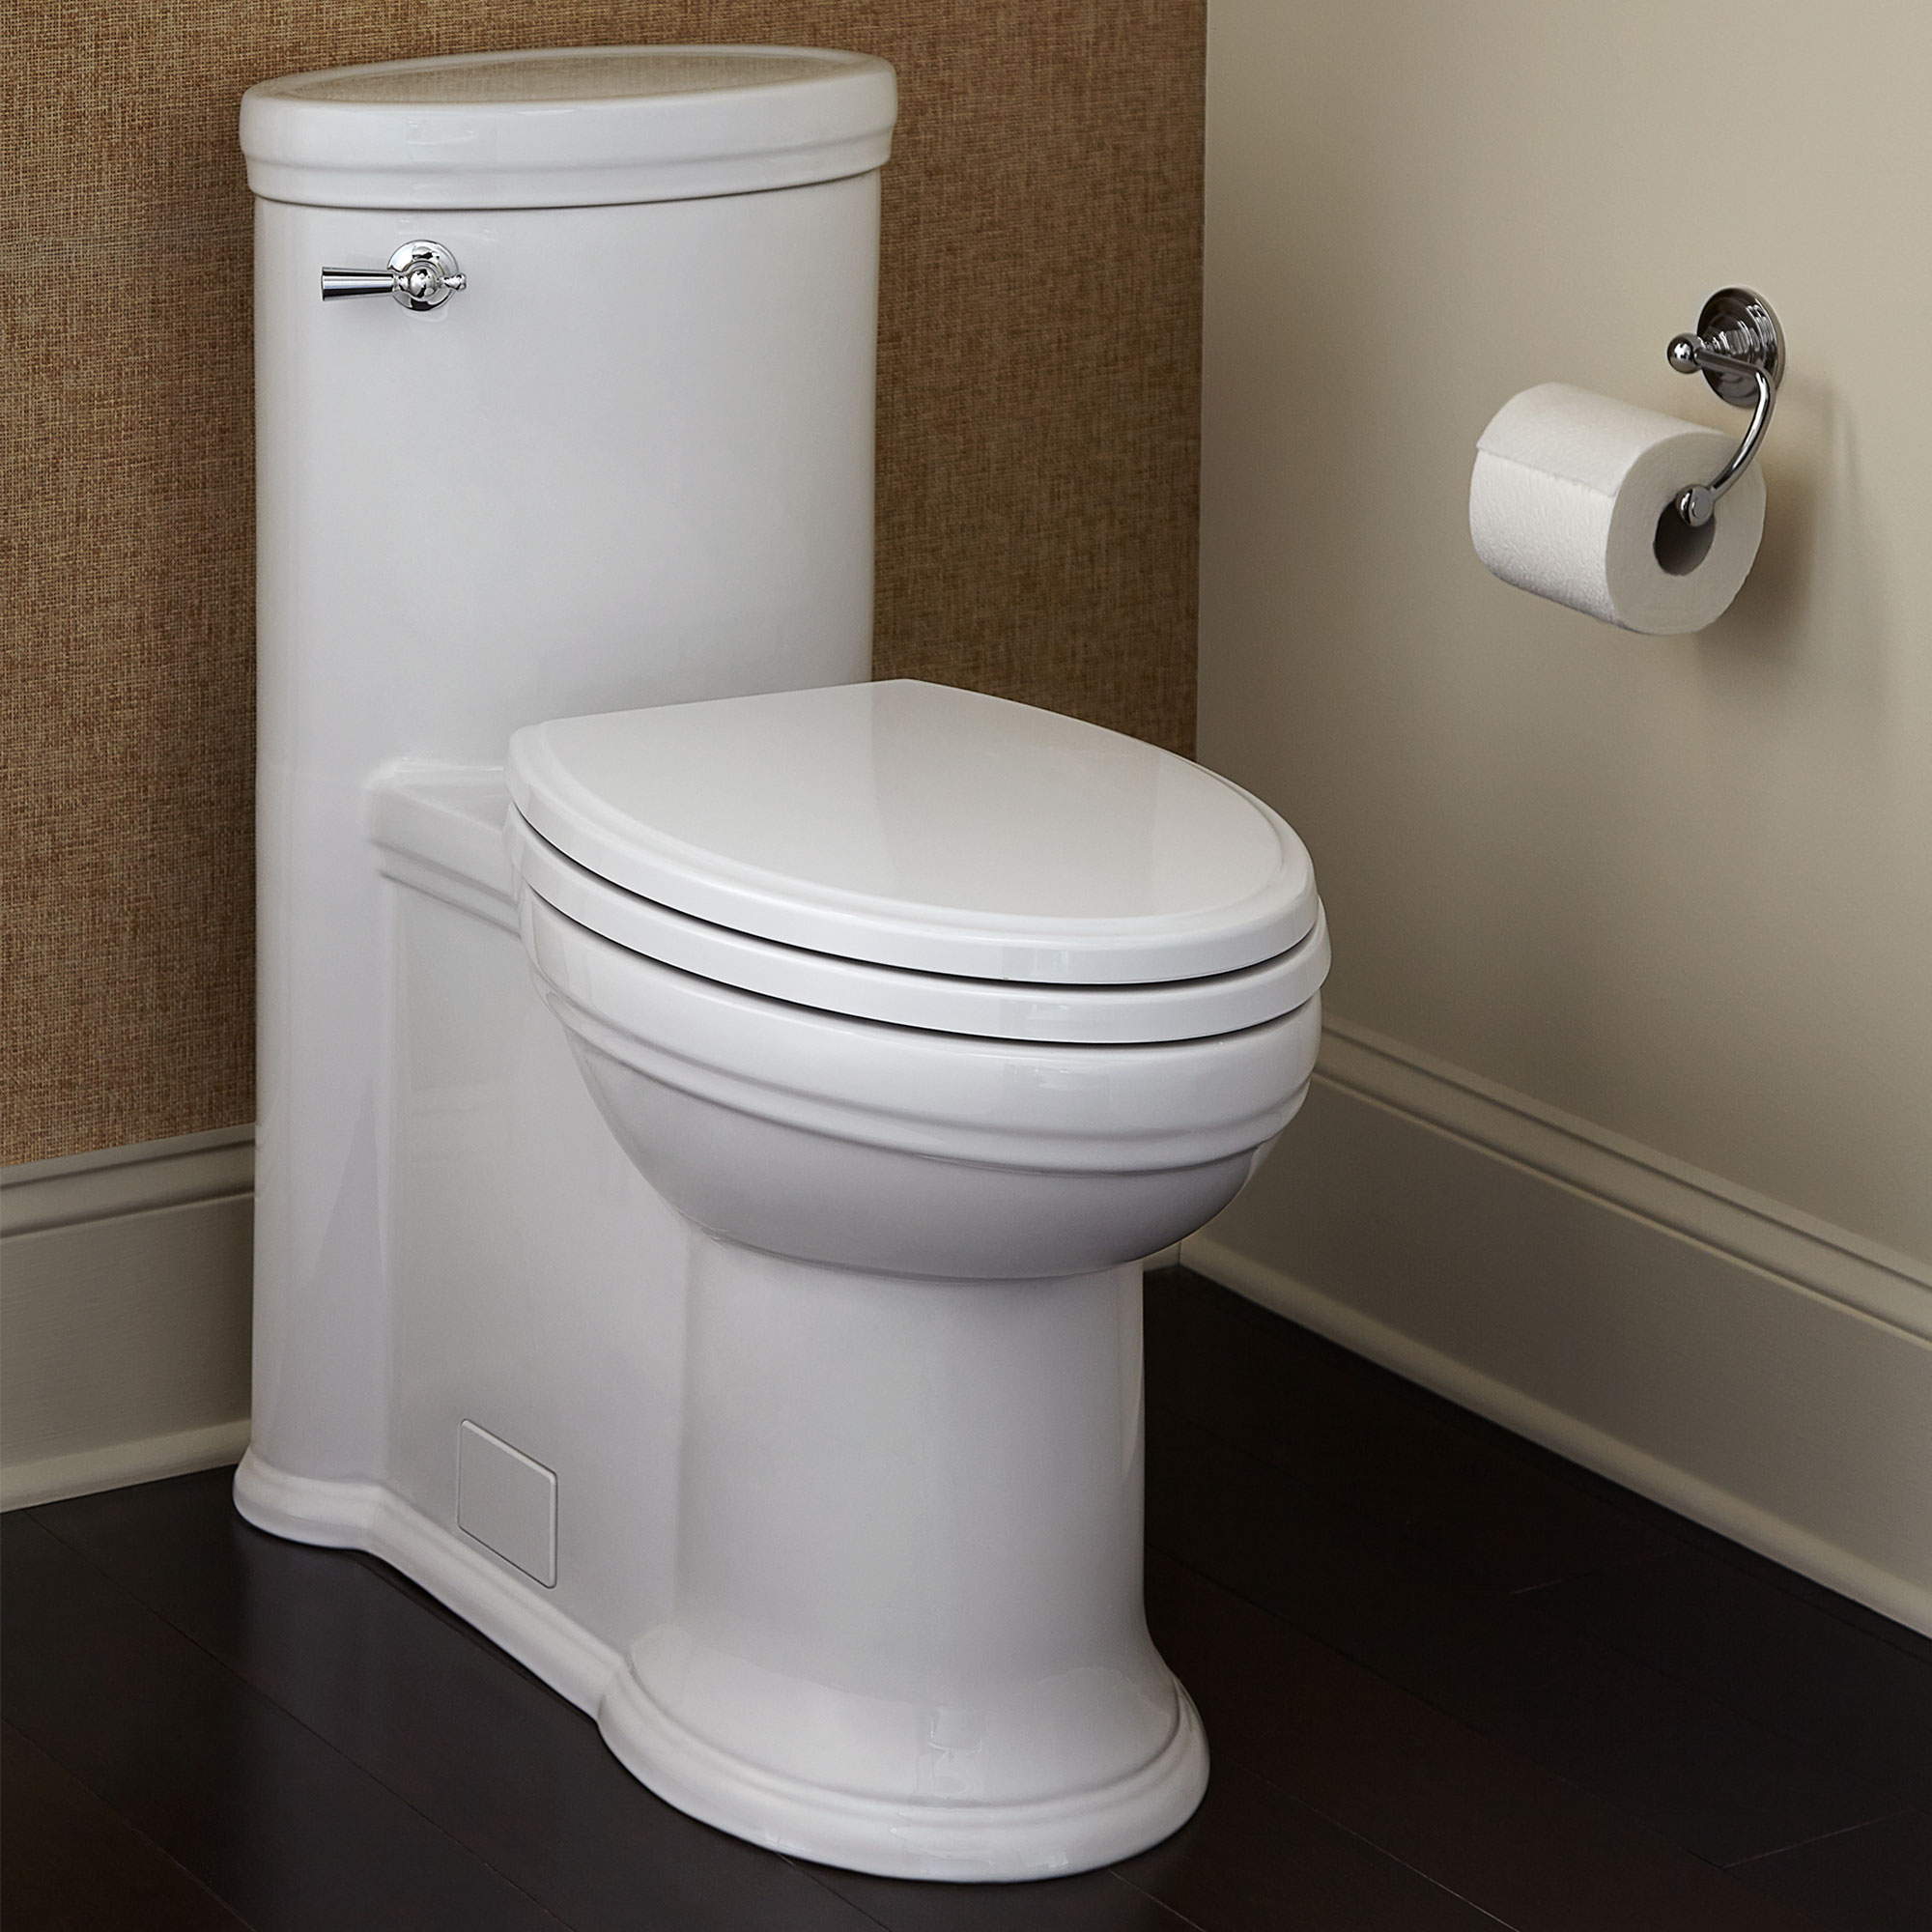 Saint George One-Piece Chair Height Elongated Toilet with Seat